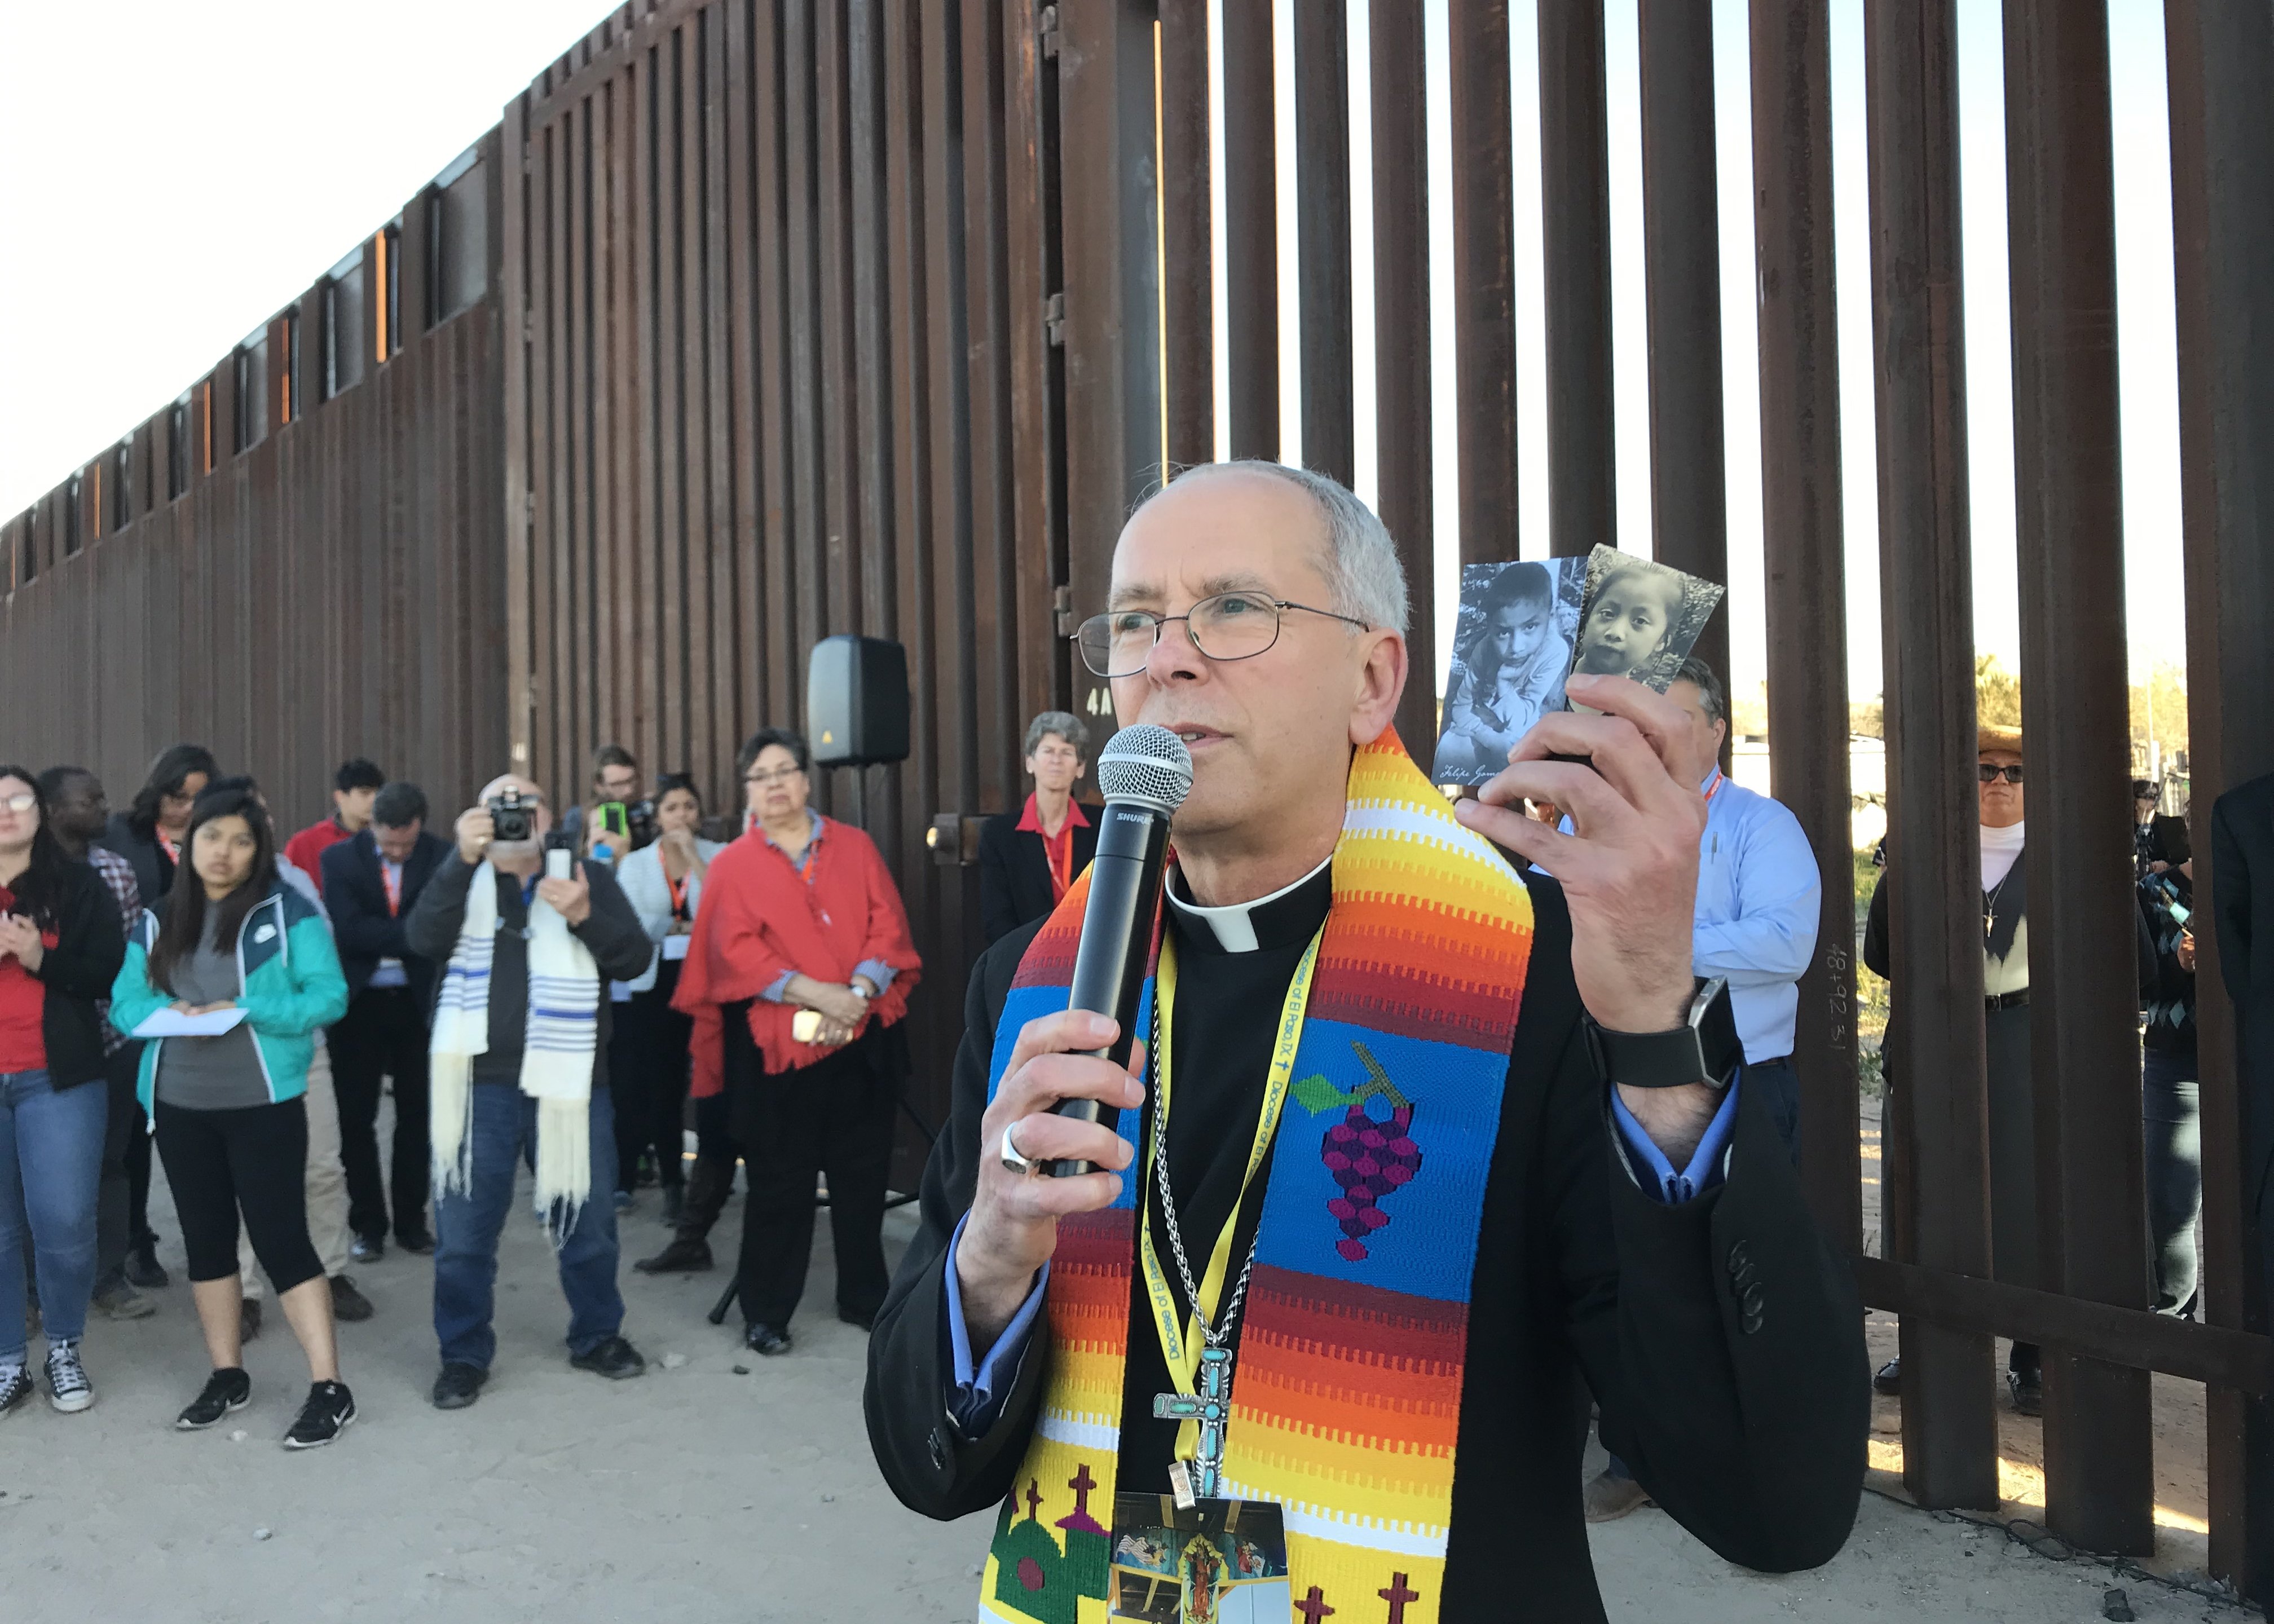 Bishop Mark Seitz of El Paso, Texas, is seen Feb. 26, 2019, at the U.S.-Mexico border wall holding photos of two migrant children who died in U.S. custody. (CNS/David Agren)